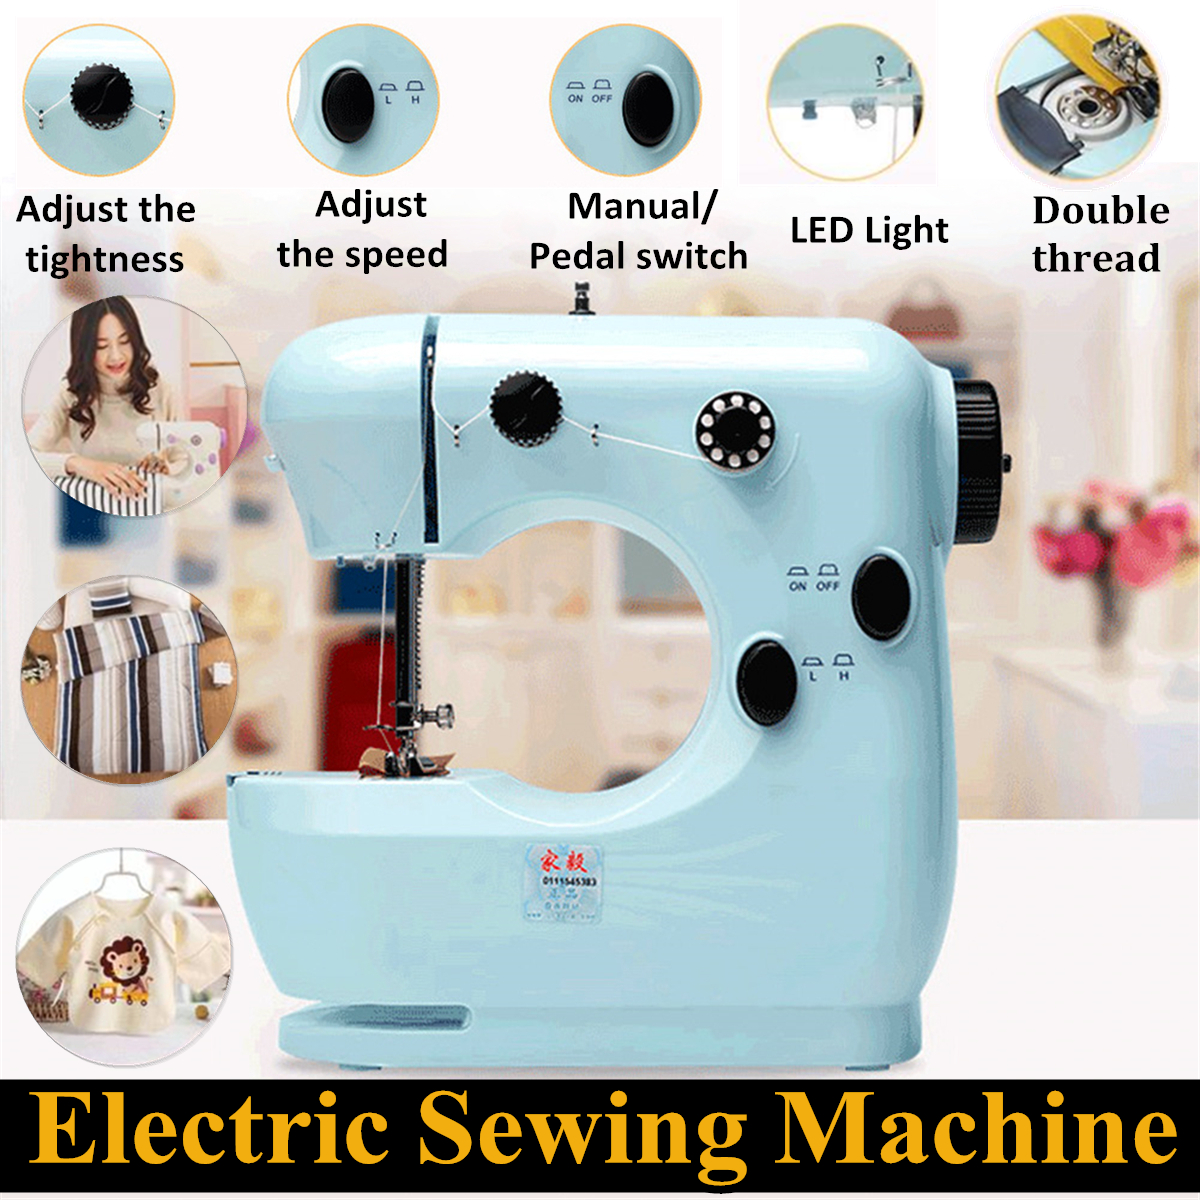 Mini-Portable-Electric-Desktop-Sewing-Machine-2-Speeds-For-DIY-Stitch-Clothes-Fabric-1690684-1